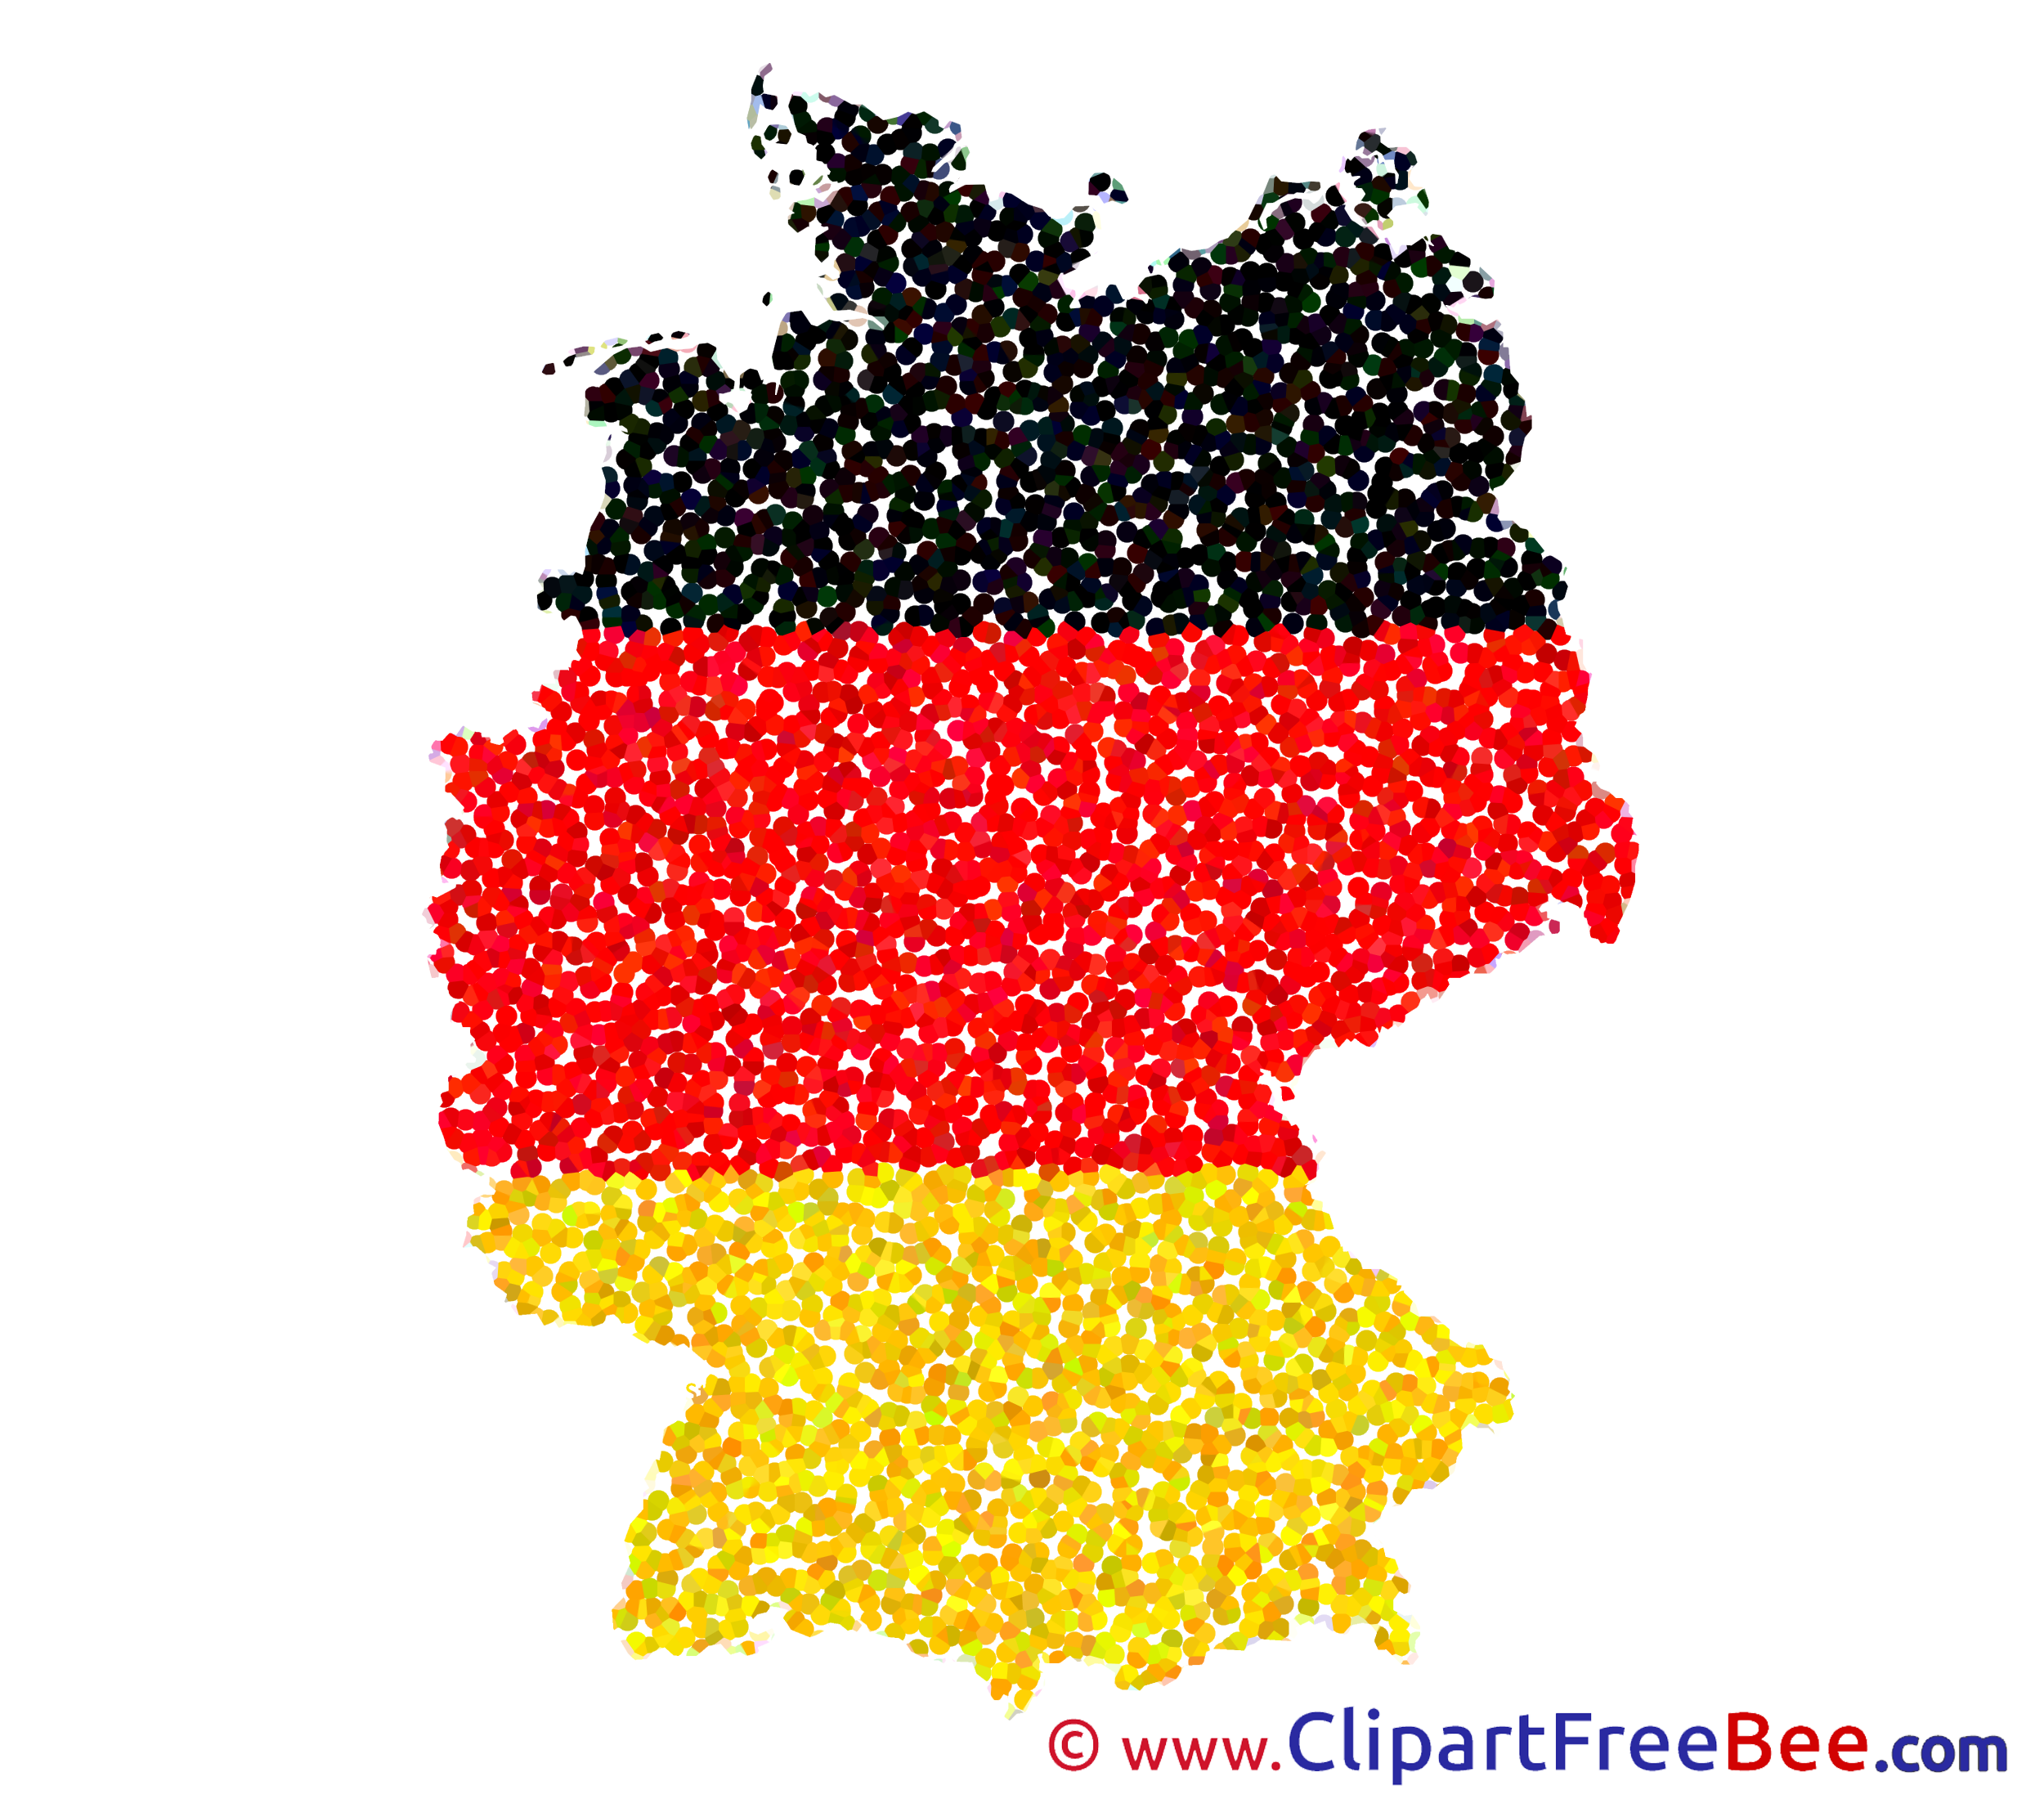 Germany Map free Cliparts for download